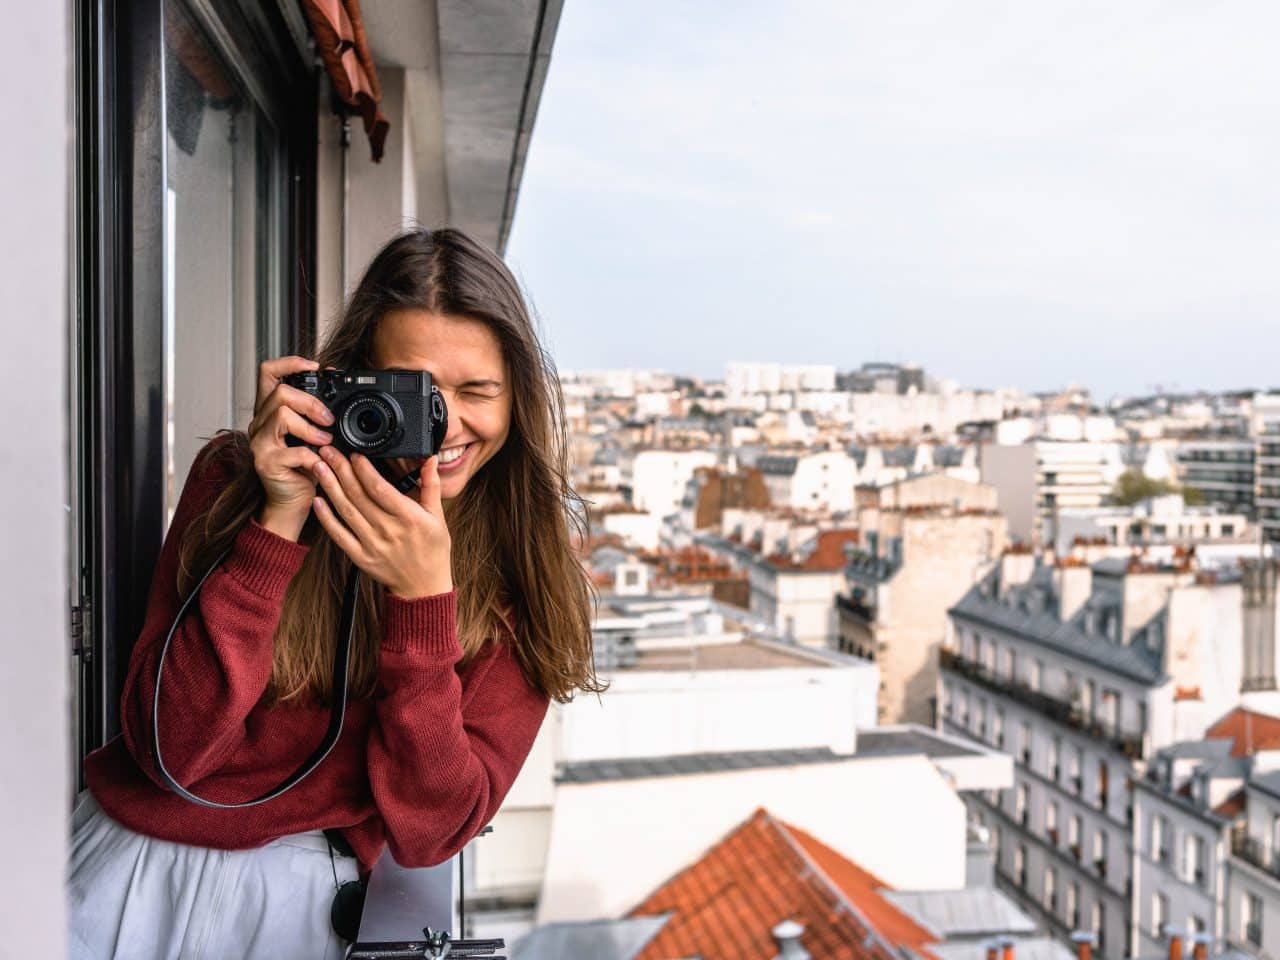 Female tourist taking a picture in a new city.